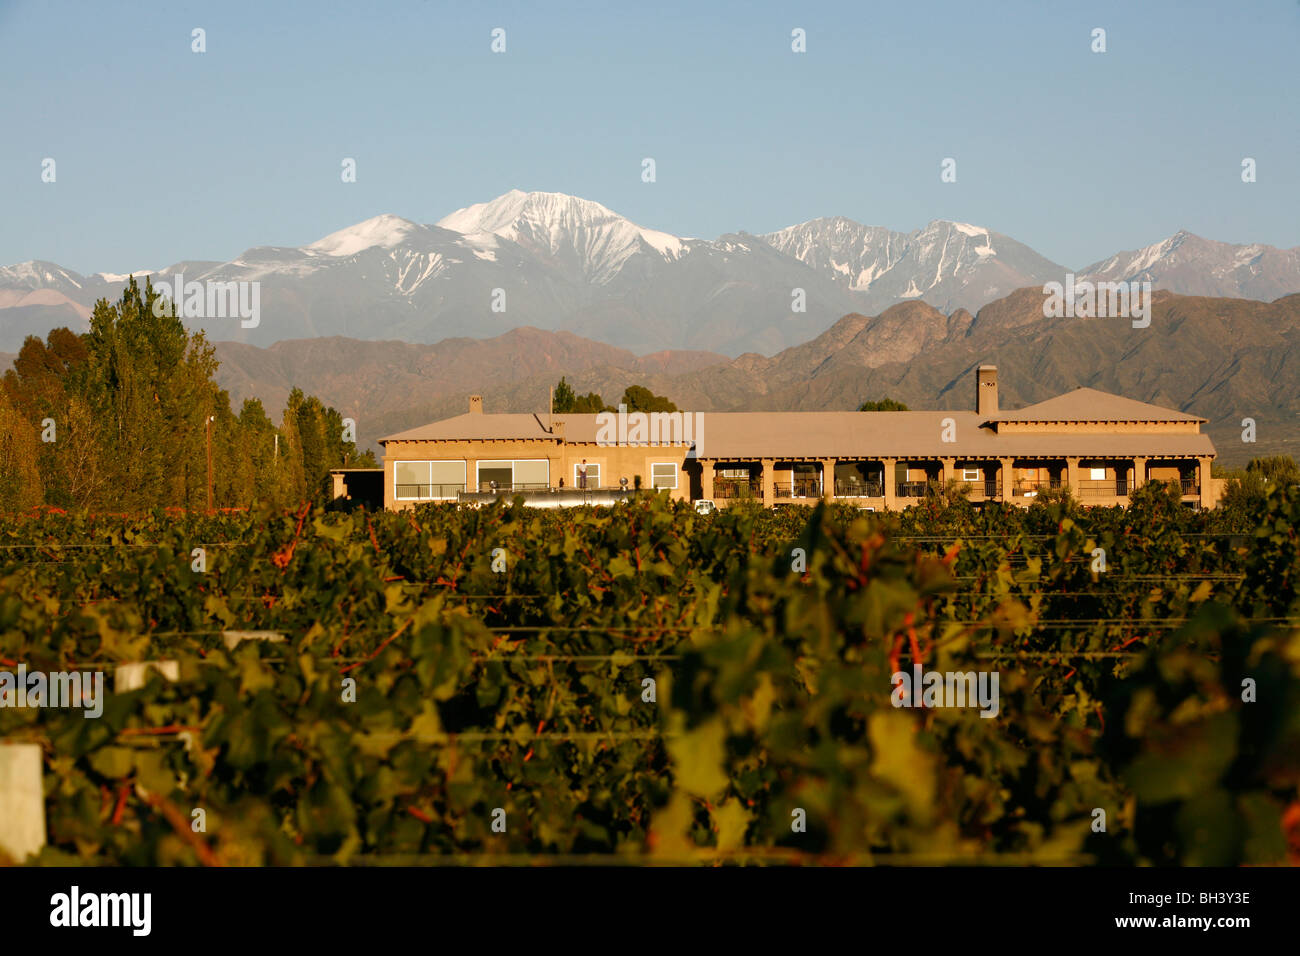 View over the Vineyards of Vistalba winery and the highest peak of the Andes mountains, Cerro Aconagua. Mendoza, Argentina. Stock Photo